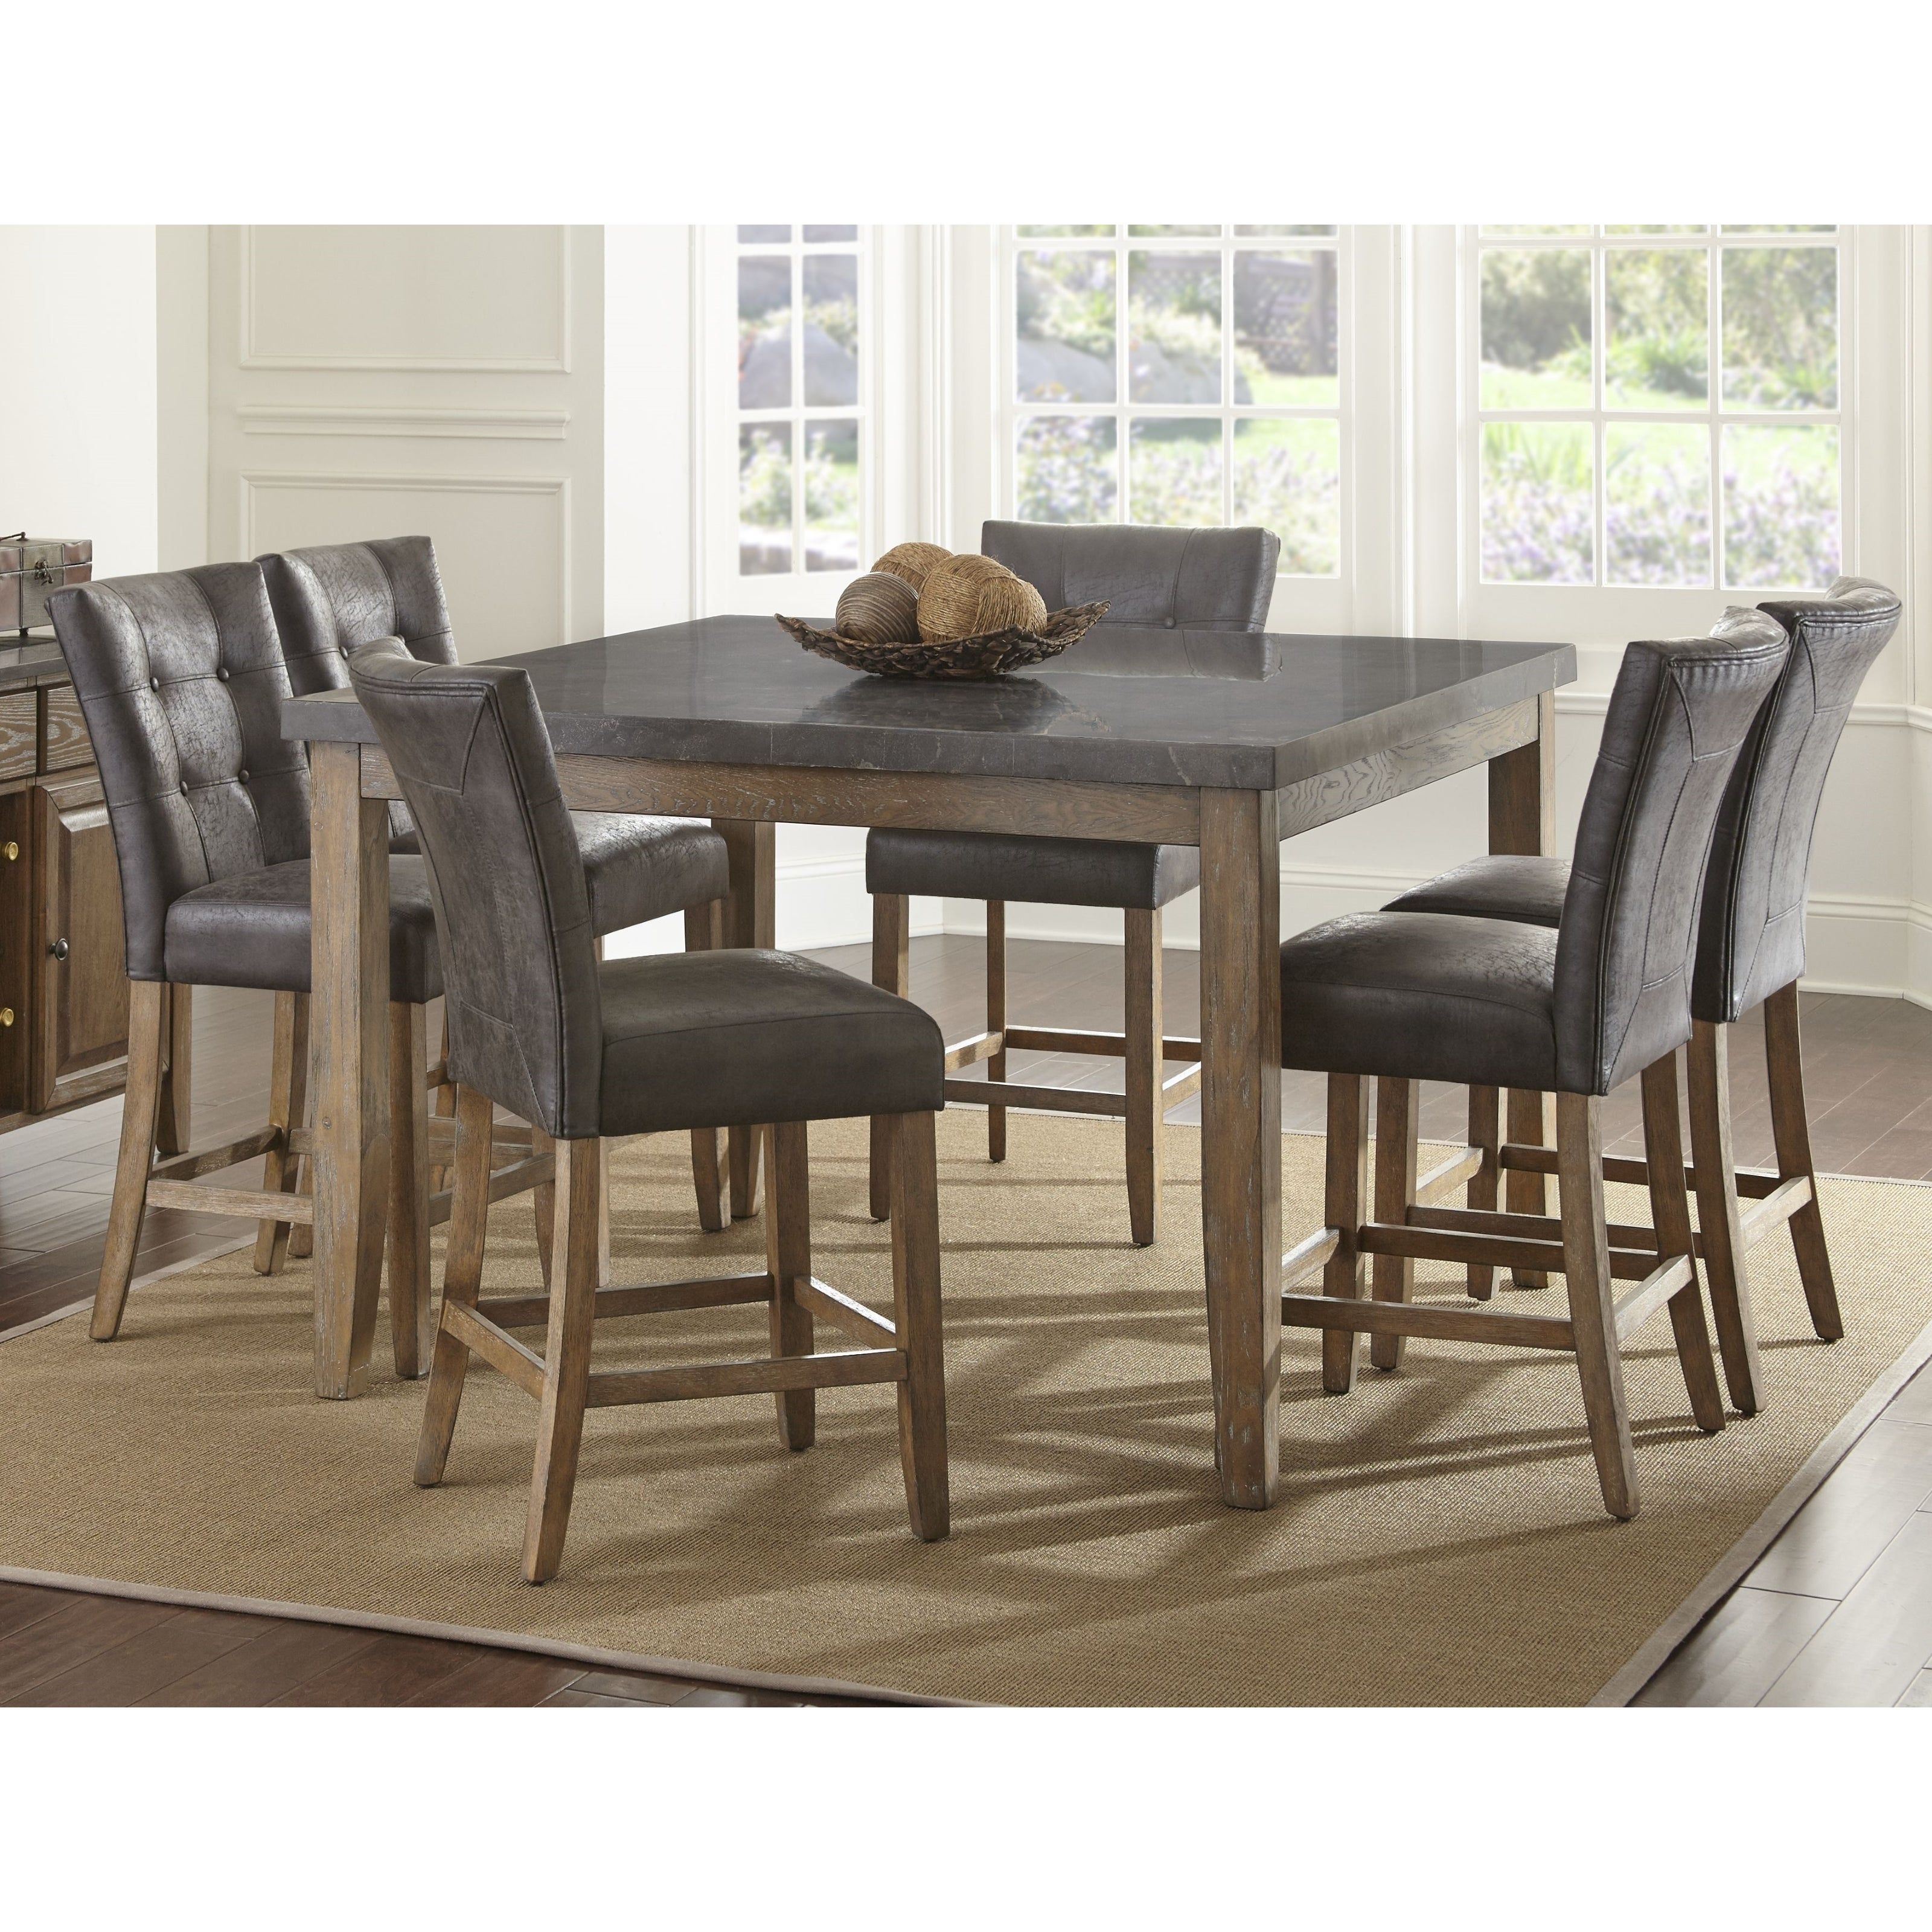 Widely Used Buy 5 Piece Sets Kitchen & Dining Room Sets Online At Overstock With Regard To West Hill Family Table 3 Piece Dining Sets (Photo 15 of 20)